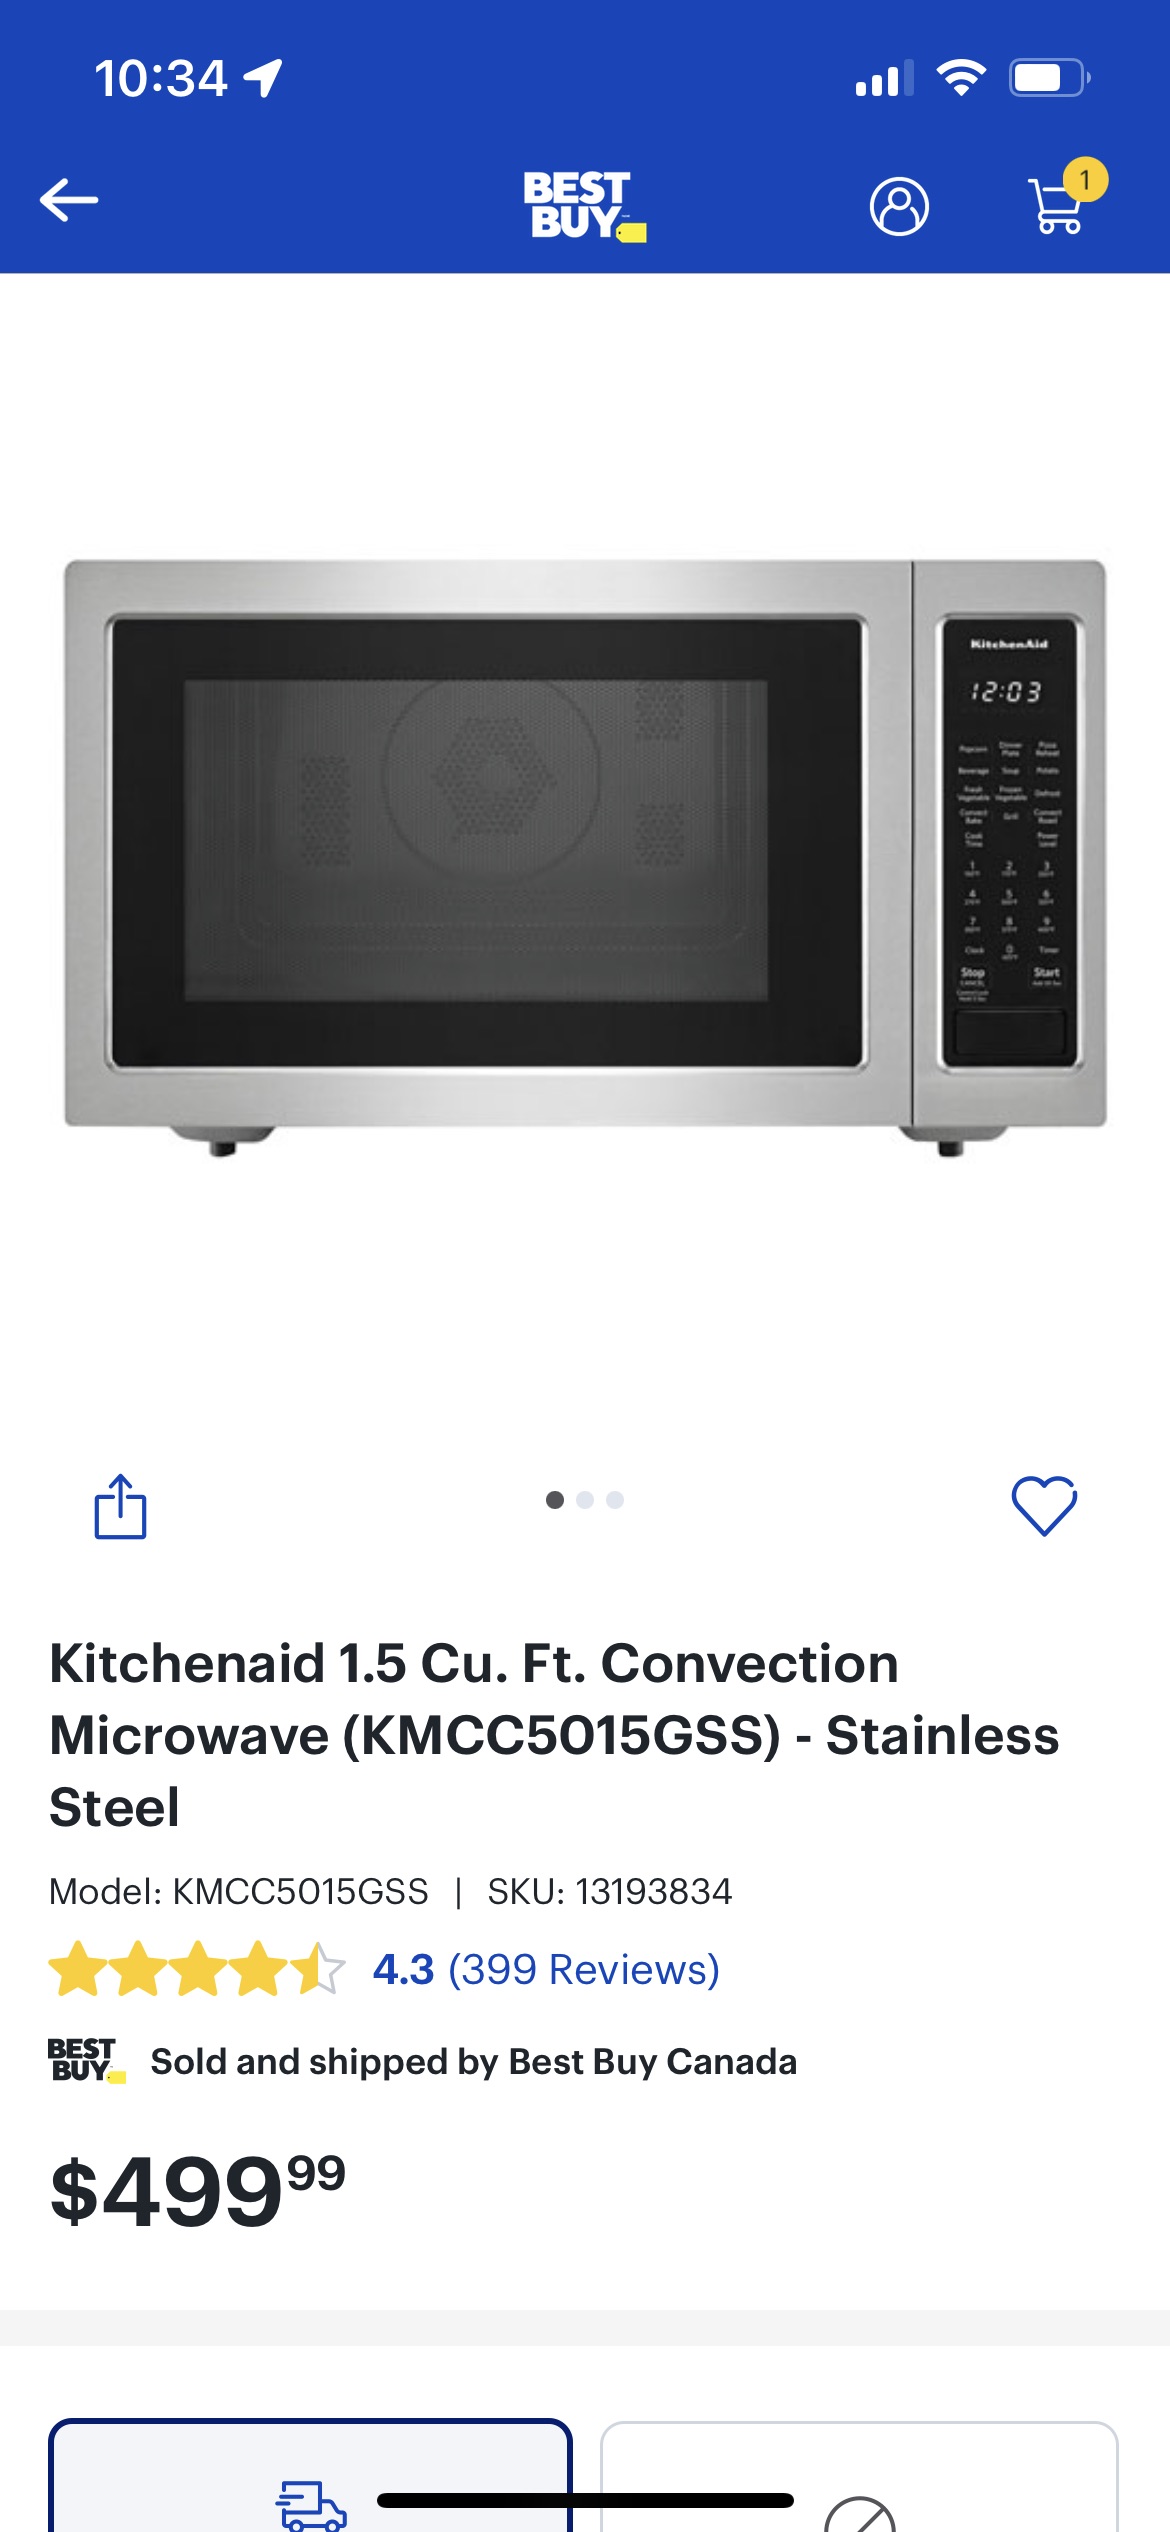 Kitchenaid 1.5 Cu. Ft. Convection Microwave (KMCC5015GSS) - Stainless Steel | Best Buy Canada